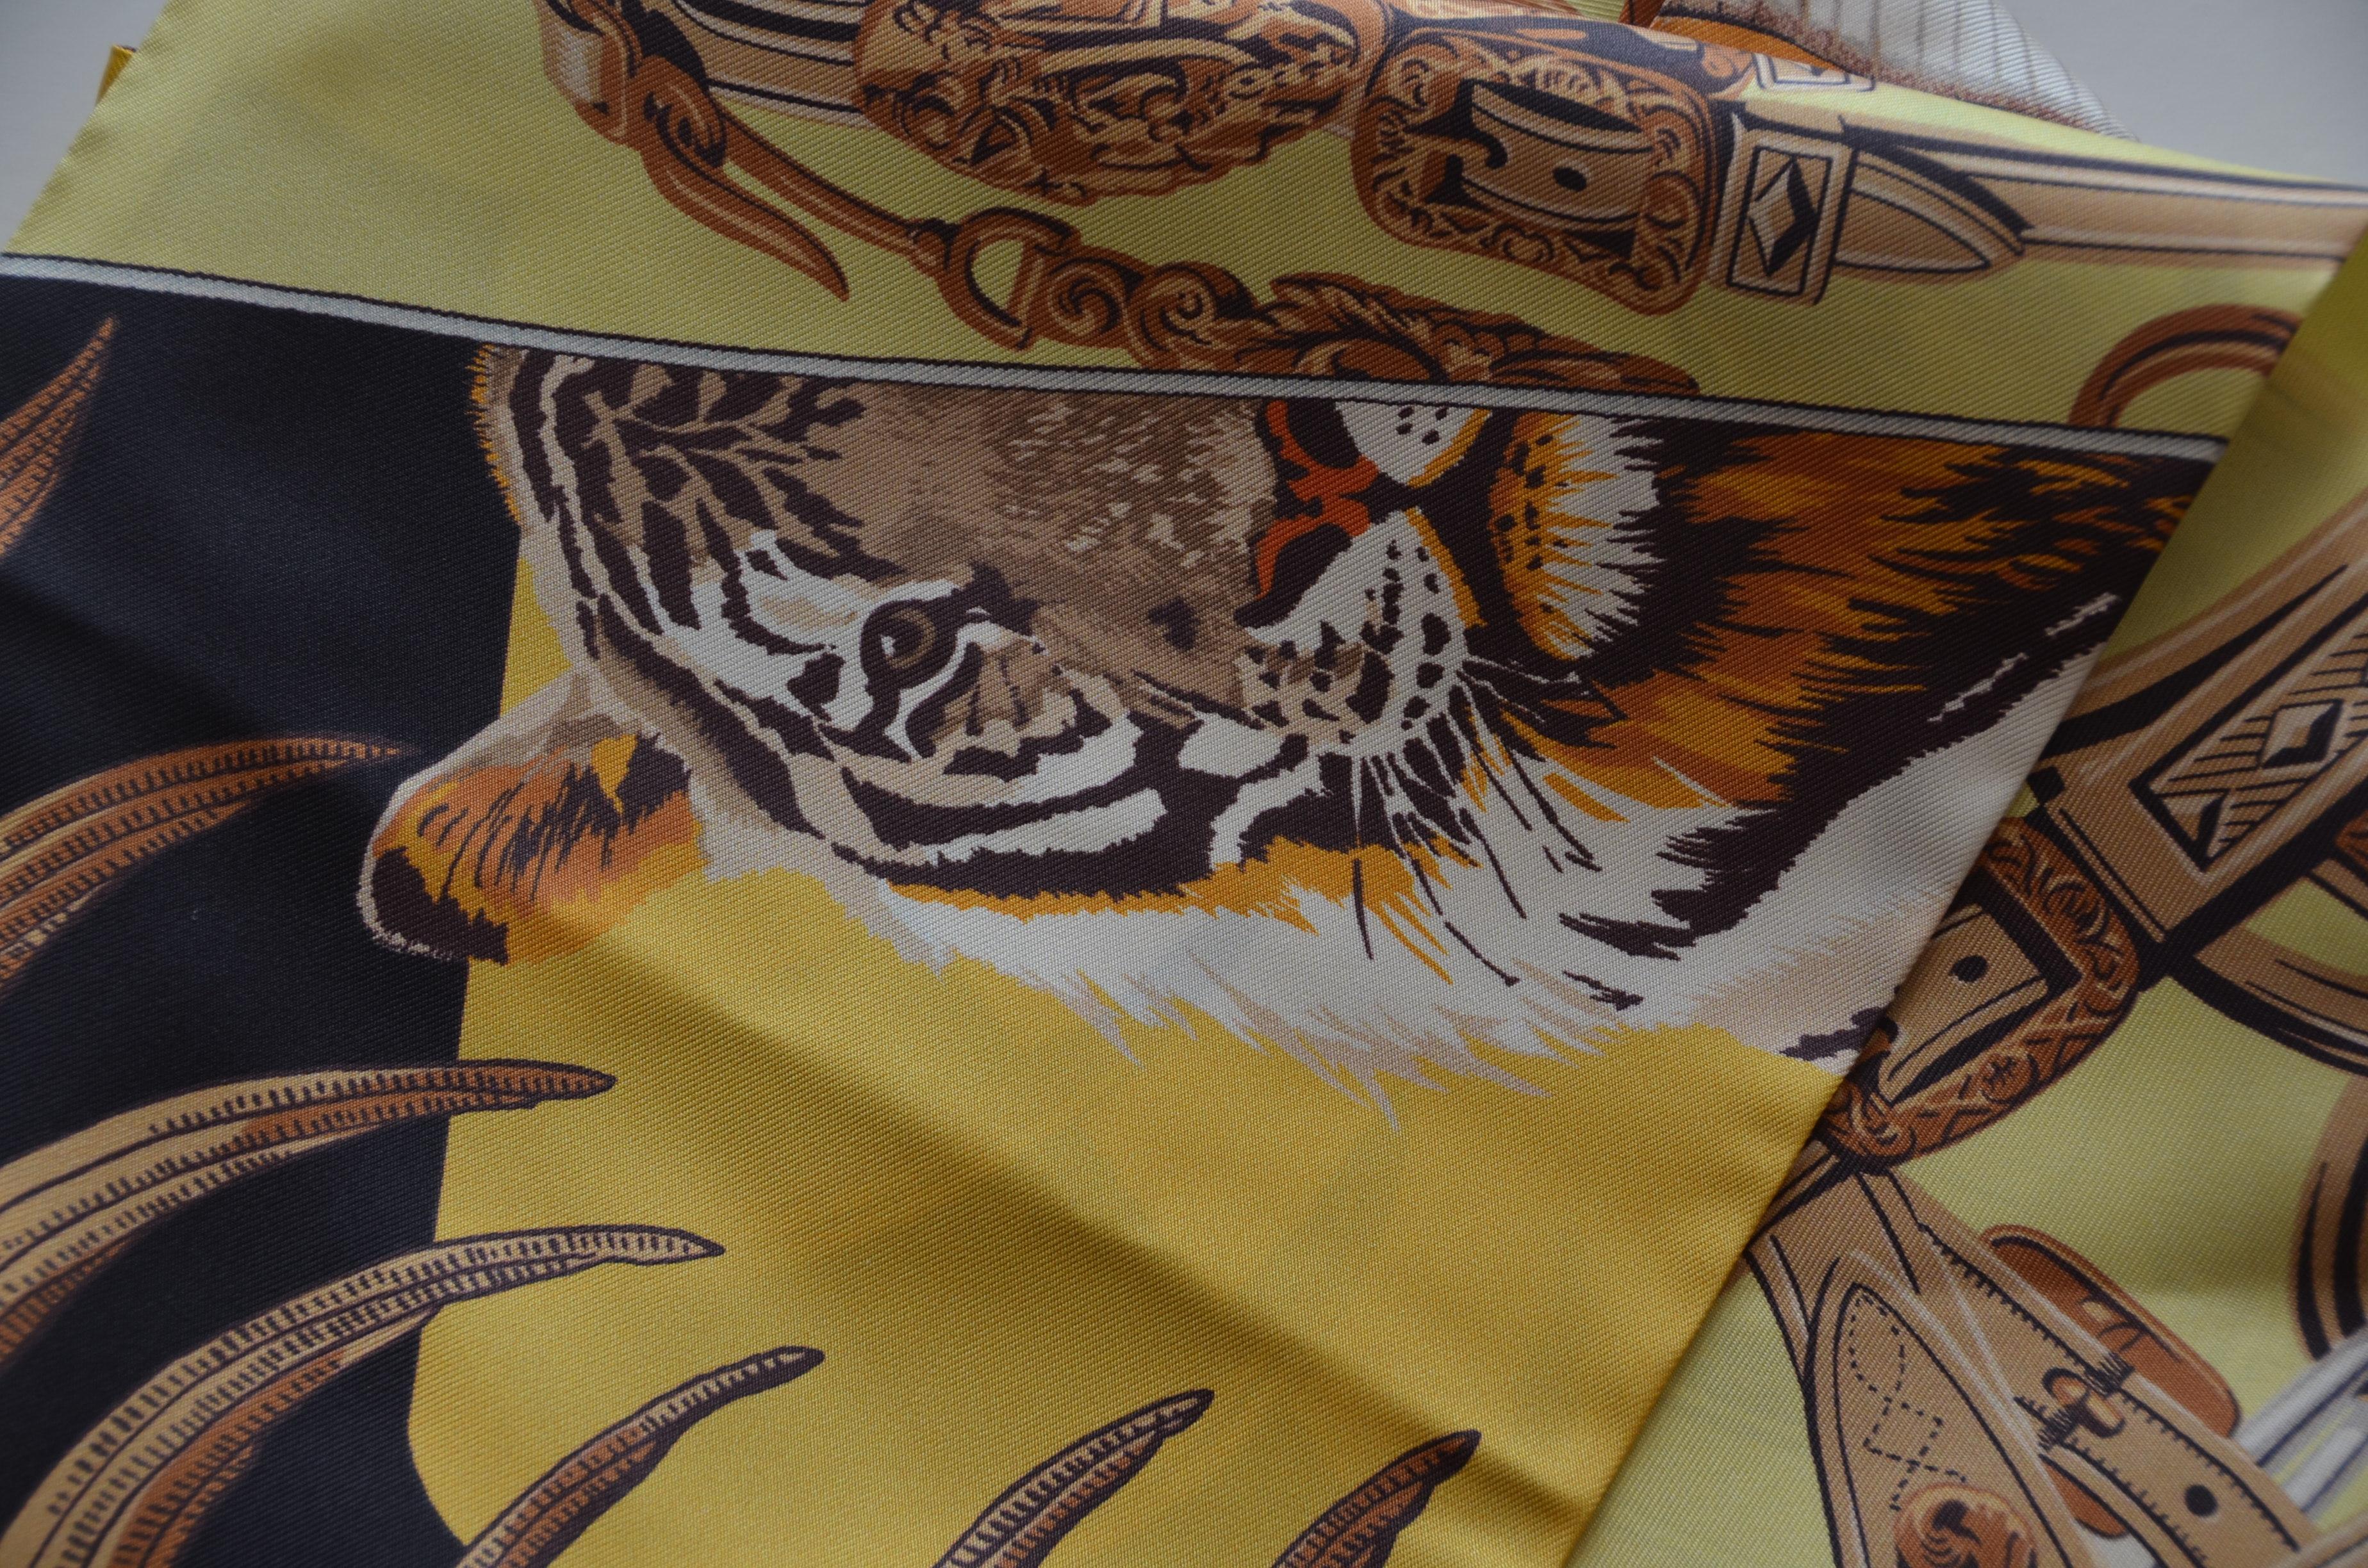 HERMES Maxi Twilly  with tiger, horses and Indian print 
100% Silk    
Size 20 X 220 CM       
NEW with tags and box
Colors Jaune/Noir 
Made in France 

FINAL SALE

